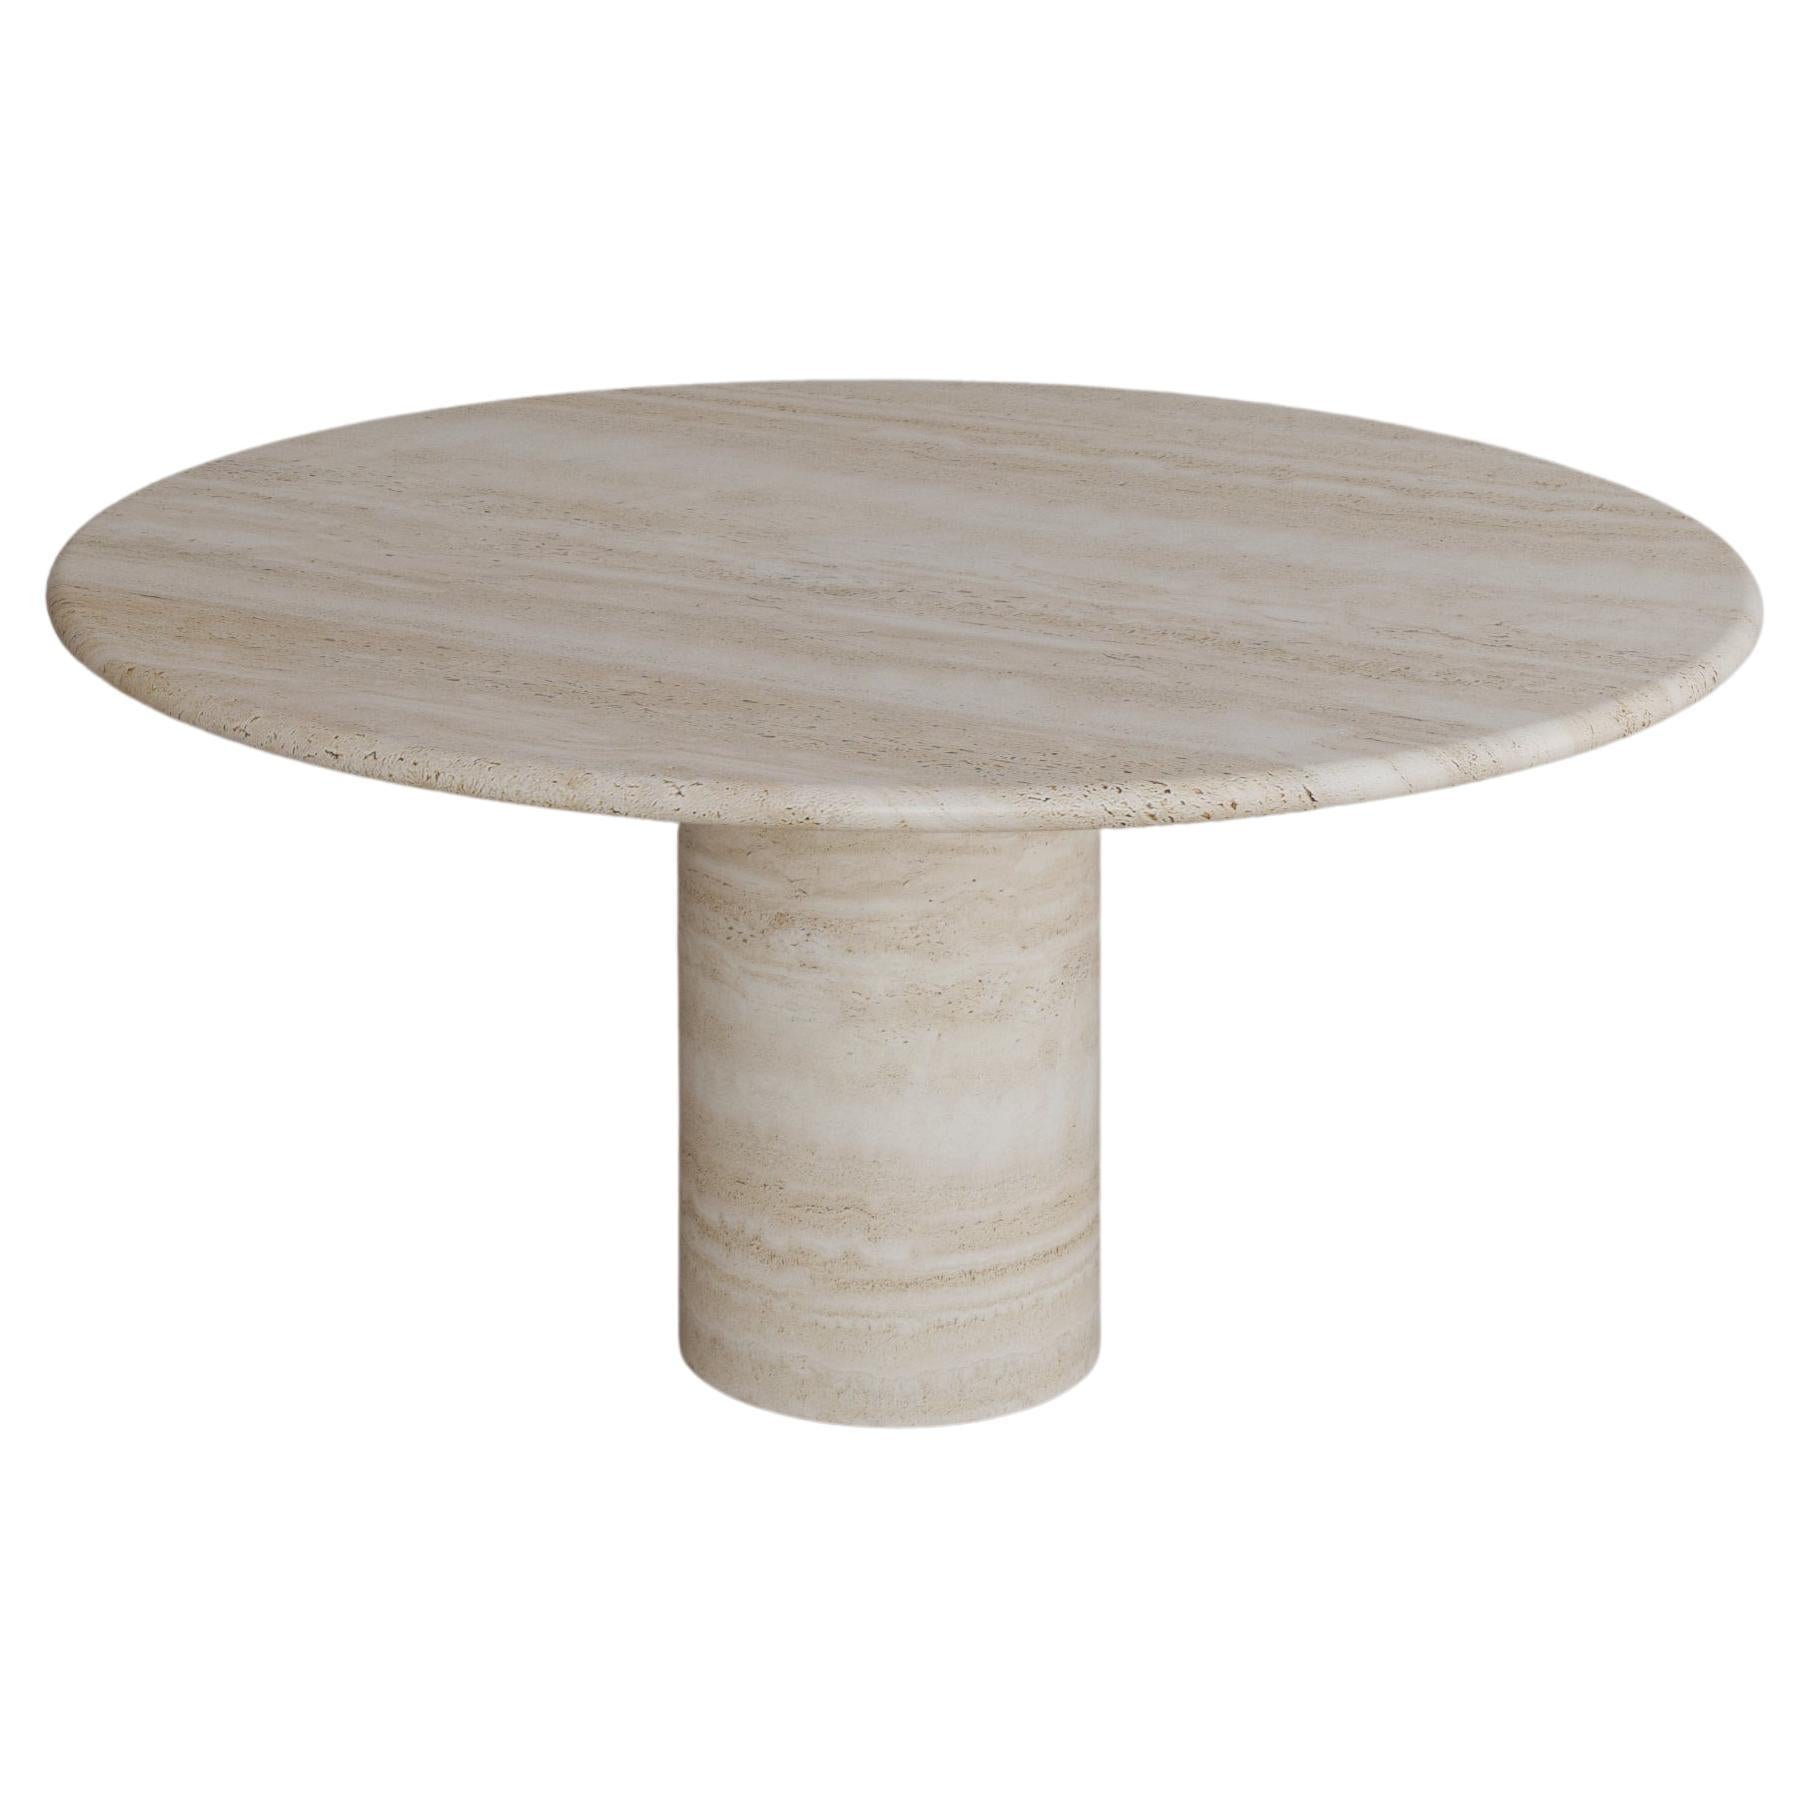 Nude Travertine Voyage Dining Table i by the Essentialist For Sale